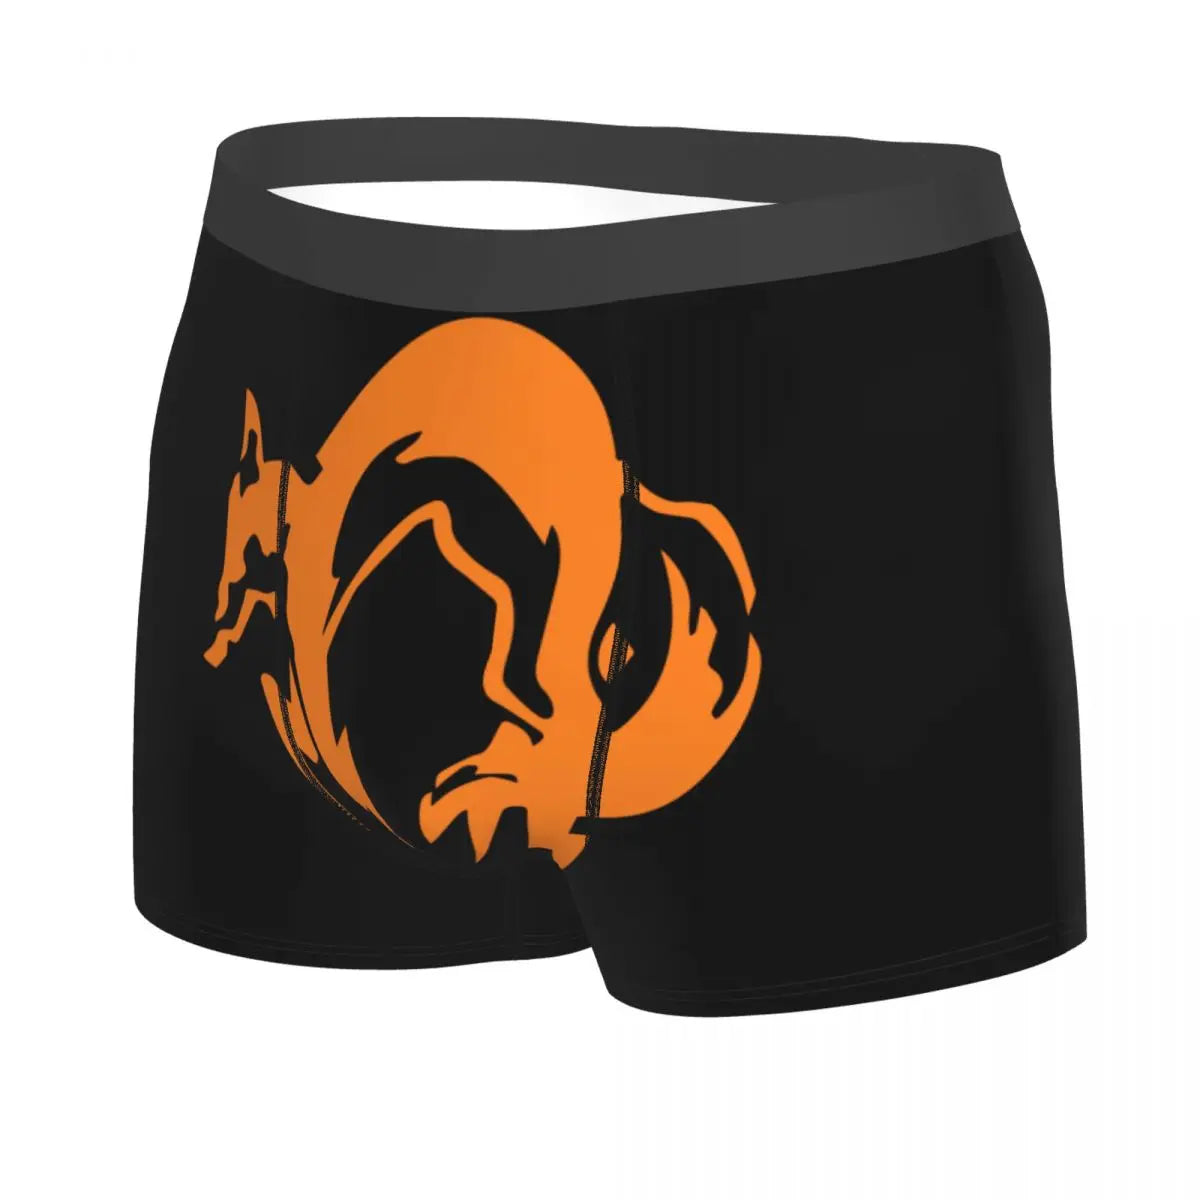 Metal Gear Solid Fox Logo Boxer Shorts For Homme 3D Print Video Game Underwear Panties Briefs Breathable Underpants